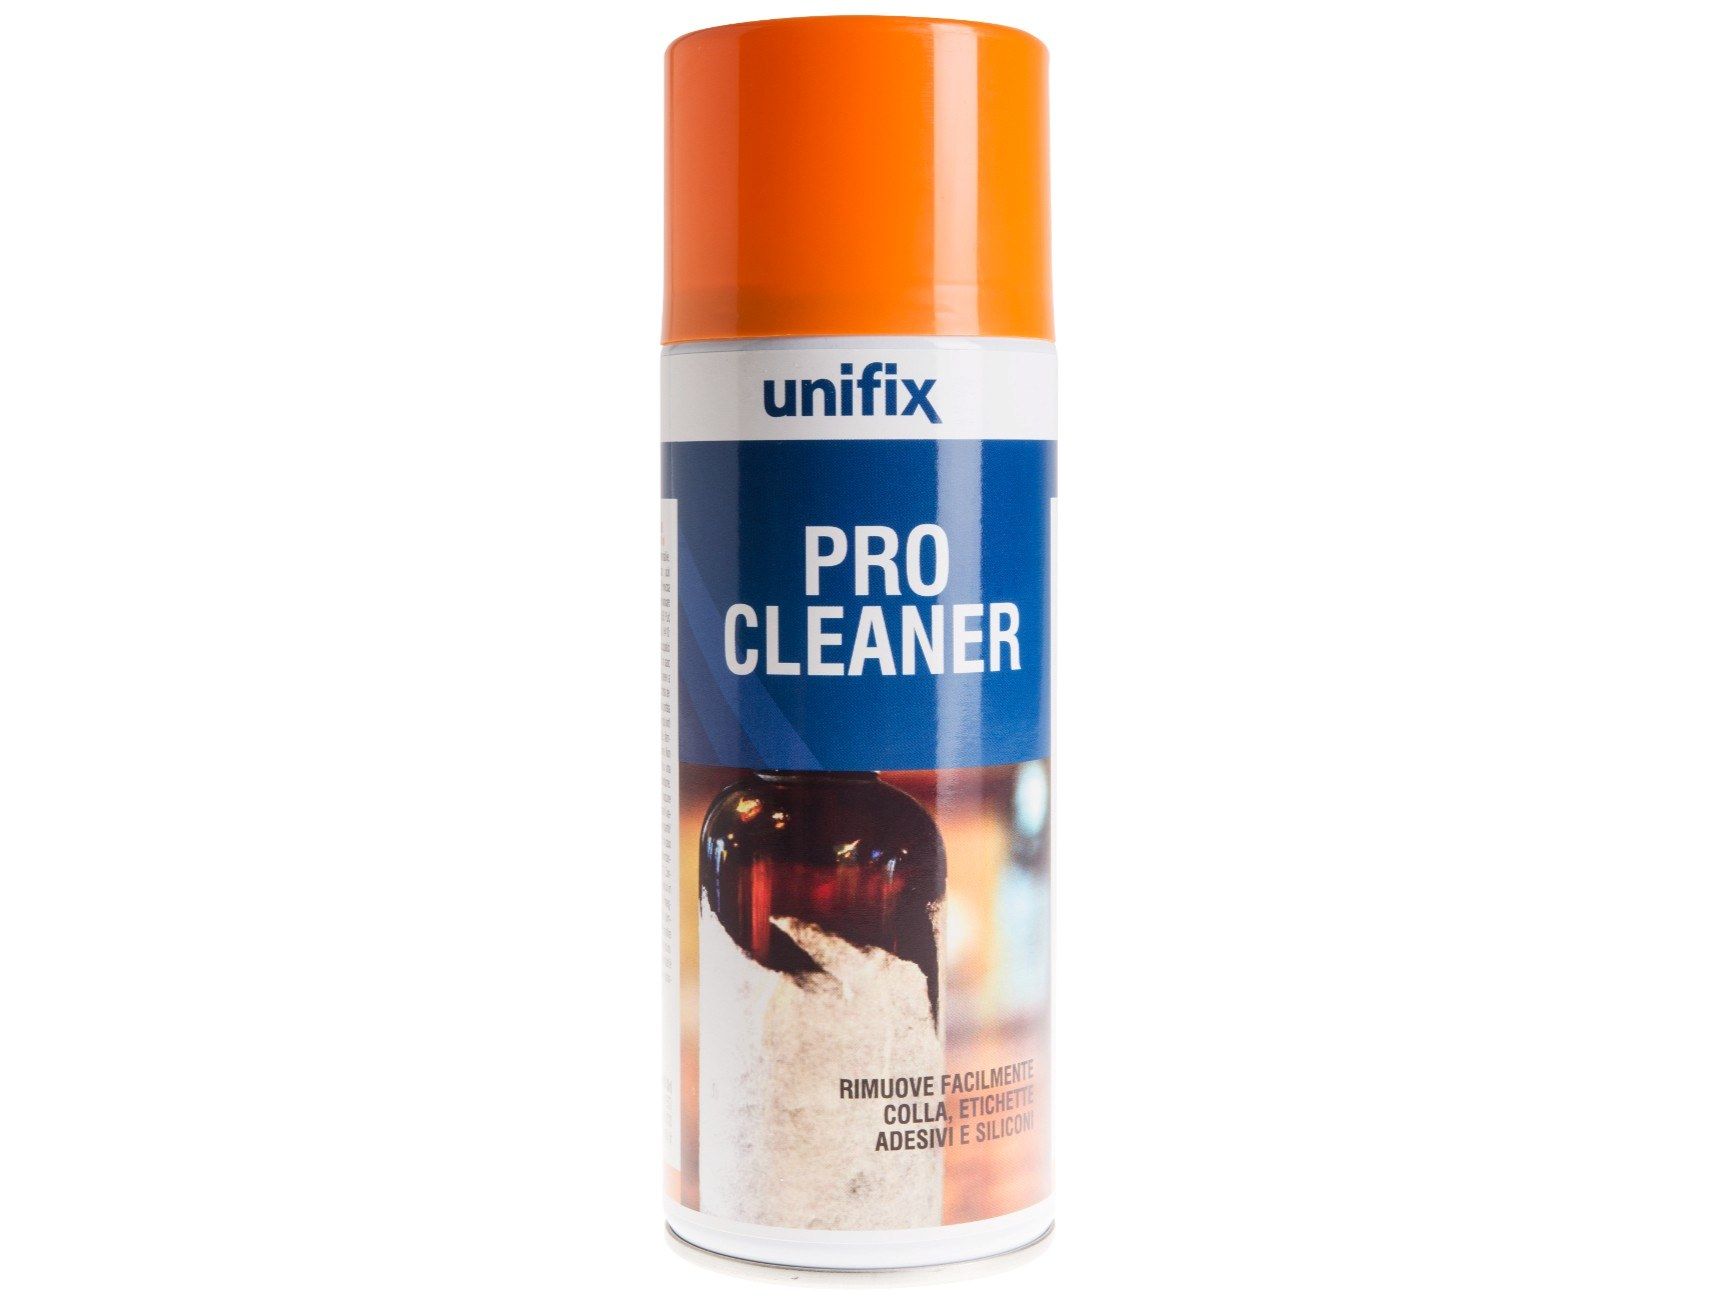 PRO CLEANER by Unifix SWG - Spray dissolvente rapido professionale